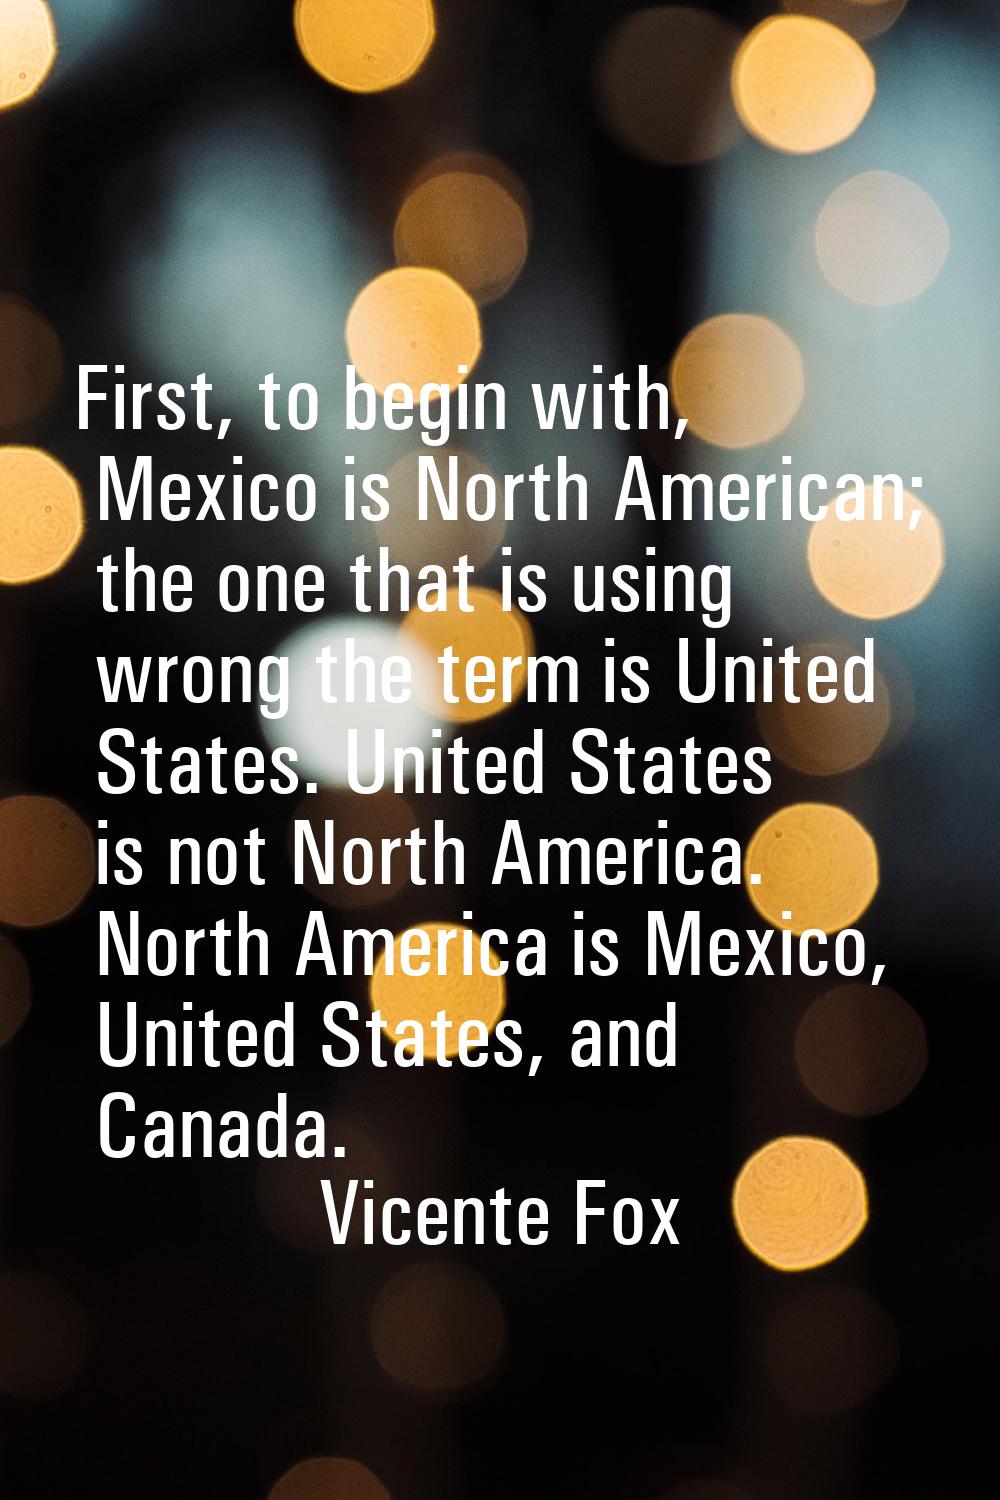 First, to begin with, Mexico is North American; the one that is using wrong the term is United Stat